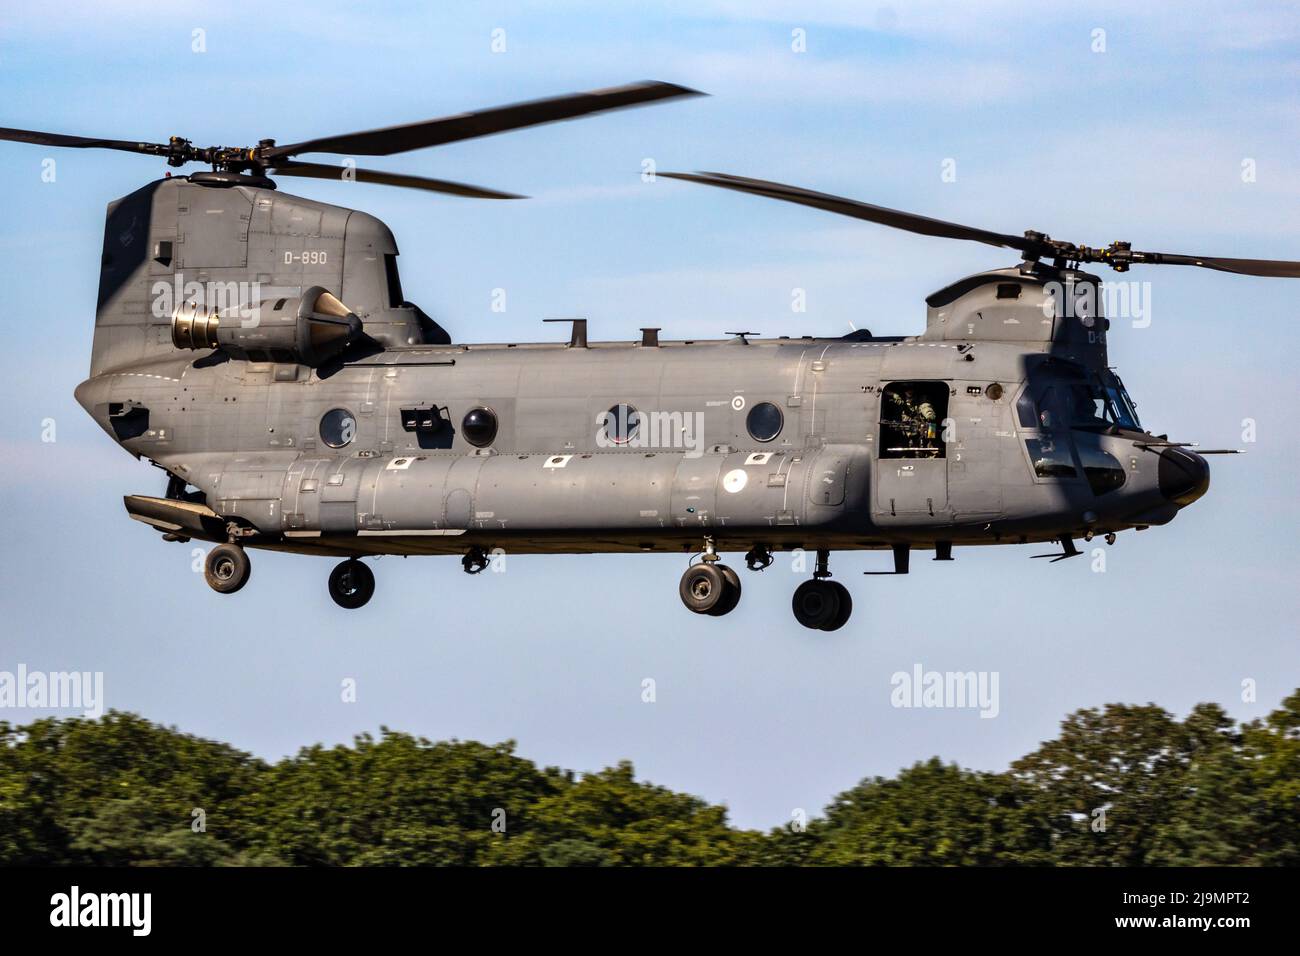 Royal Netherlands Air Force Boeing CH-47F Chinook heavy helicopter taking off from Gilze-Rijen airbase. The Netherlands - September 7, 2016 Stock Photo